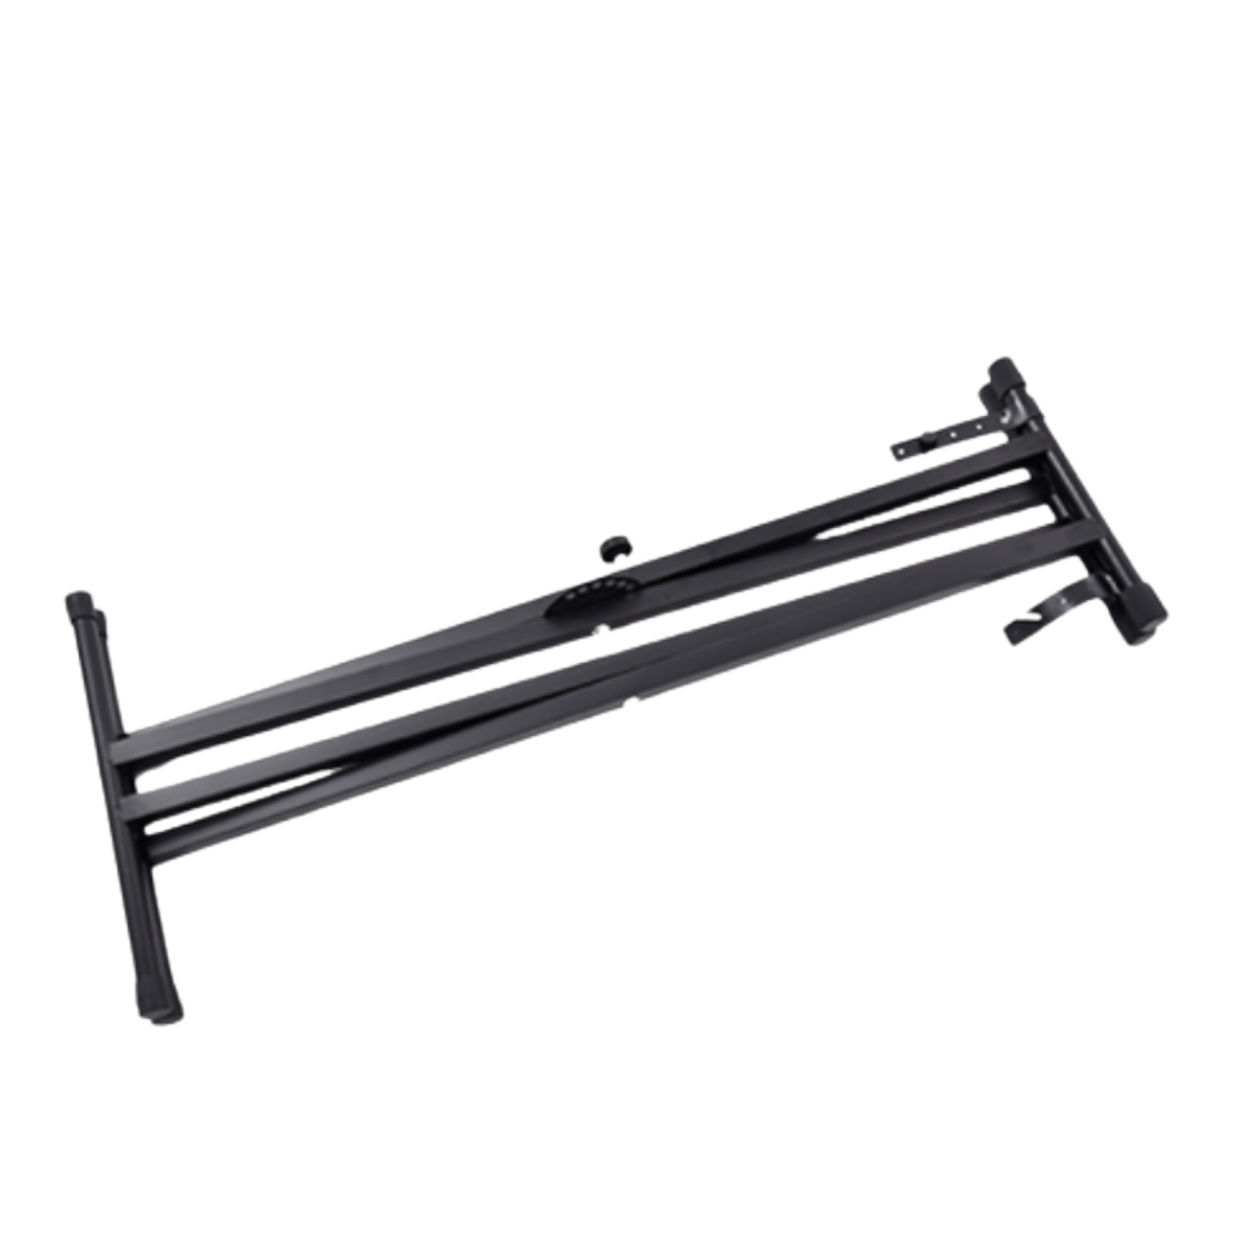 NEOWOOD Q2XC ASSEMBLY TYPE DOUBLE X KEYBOARD STAND, NEOWOOD, STAND, neowood-stand-neo-q2xc, ZOSO MUSIC SDN BHD